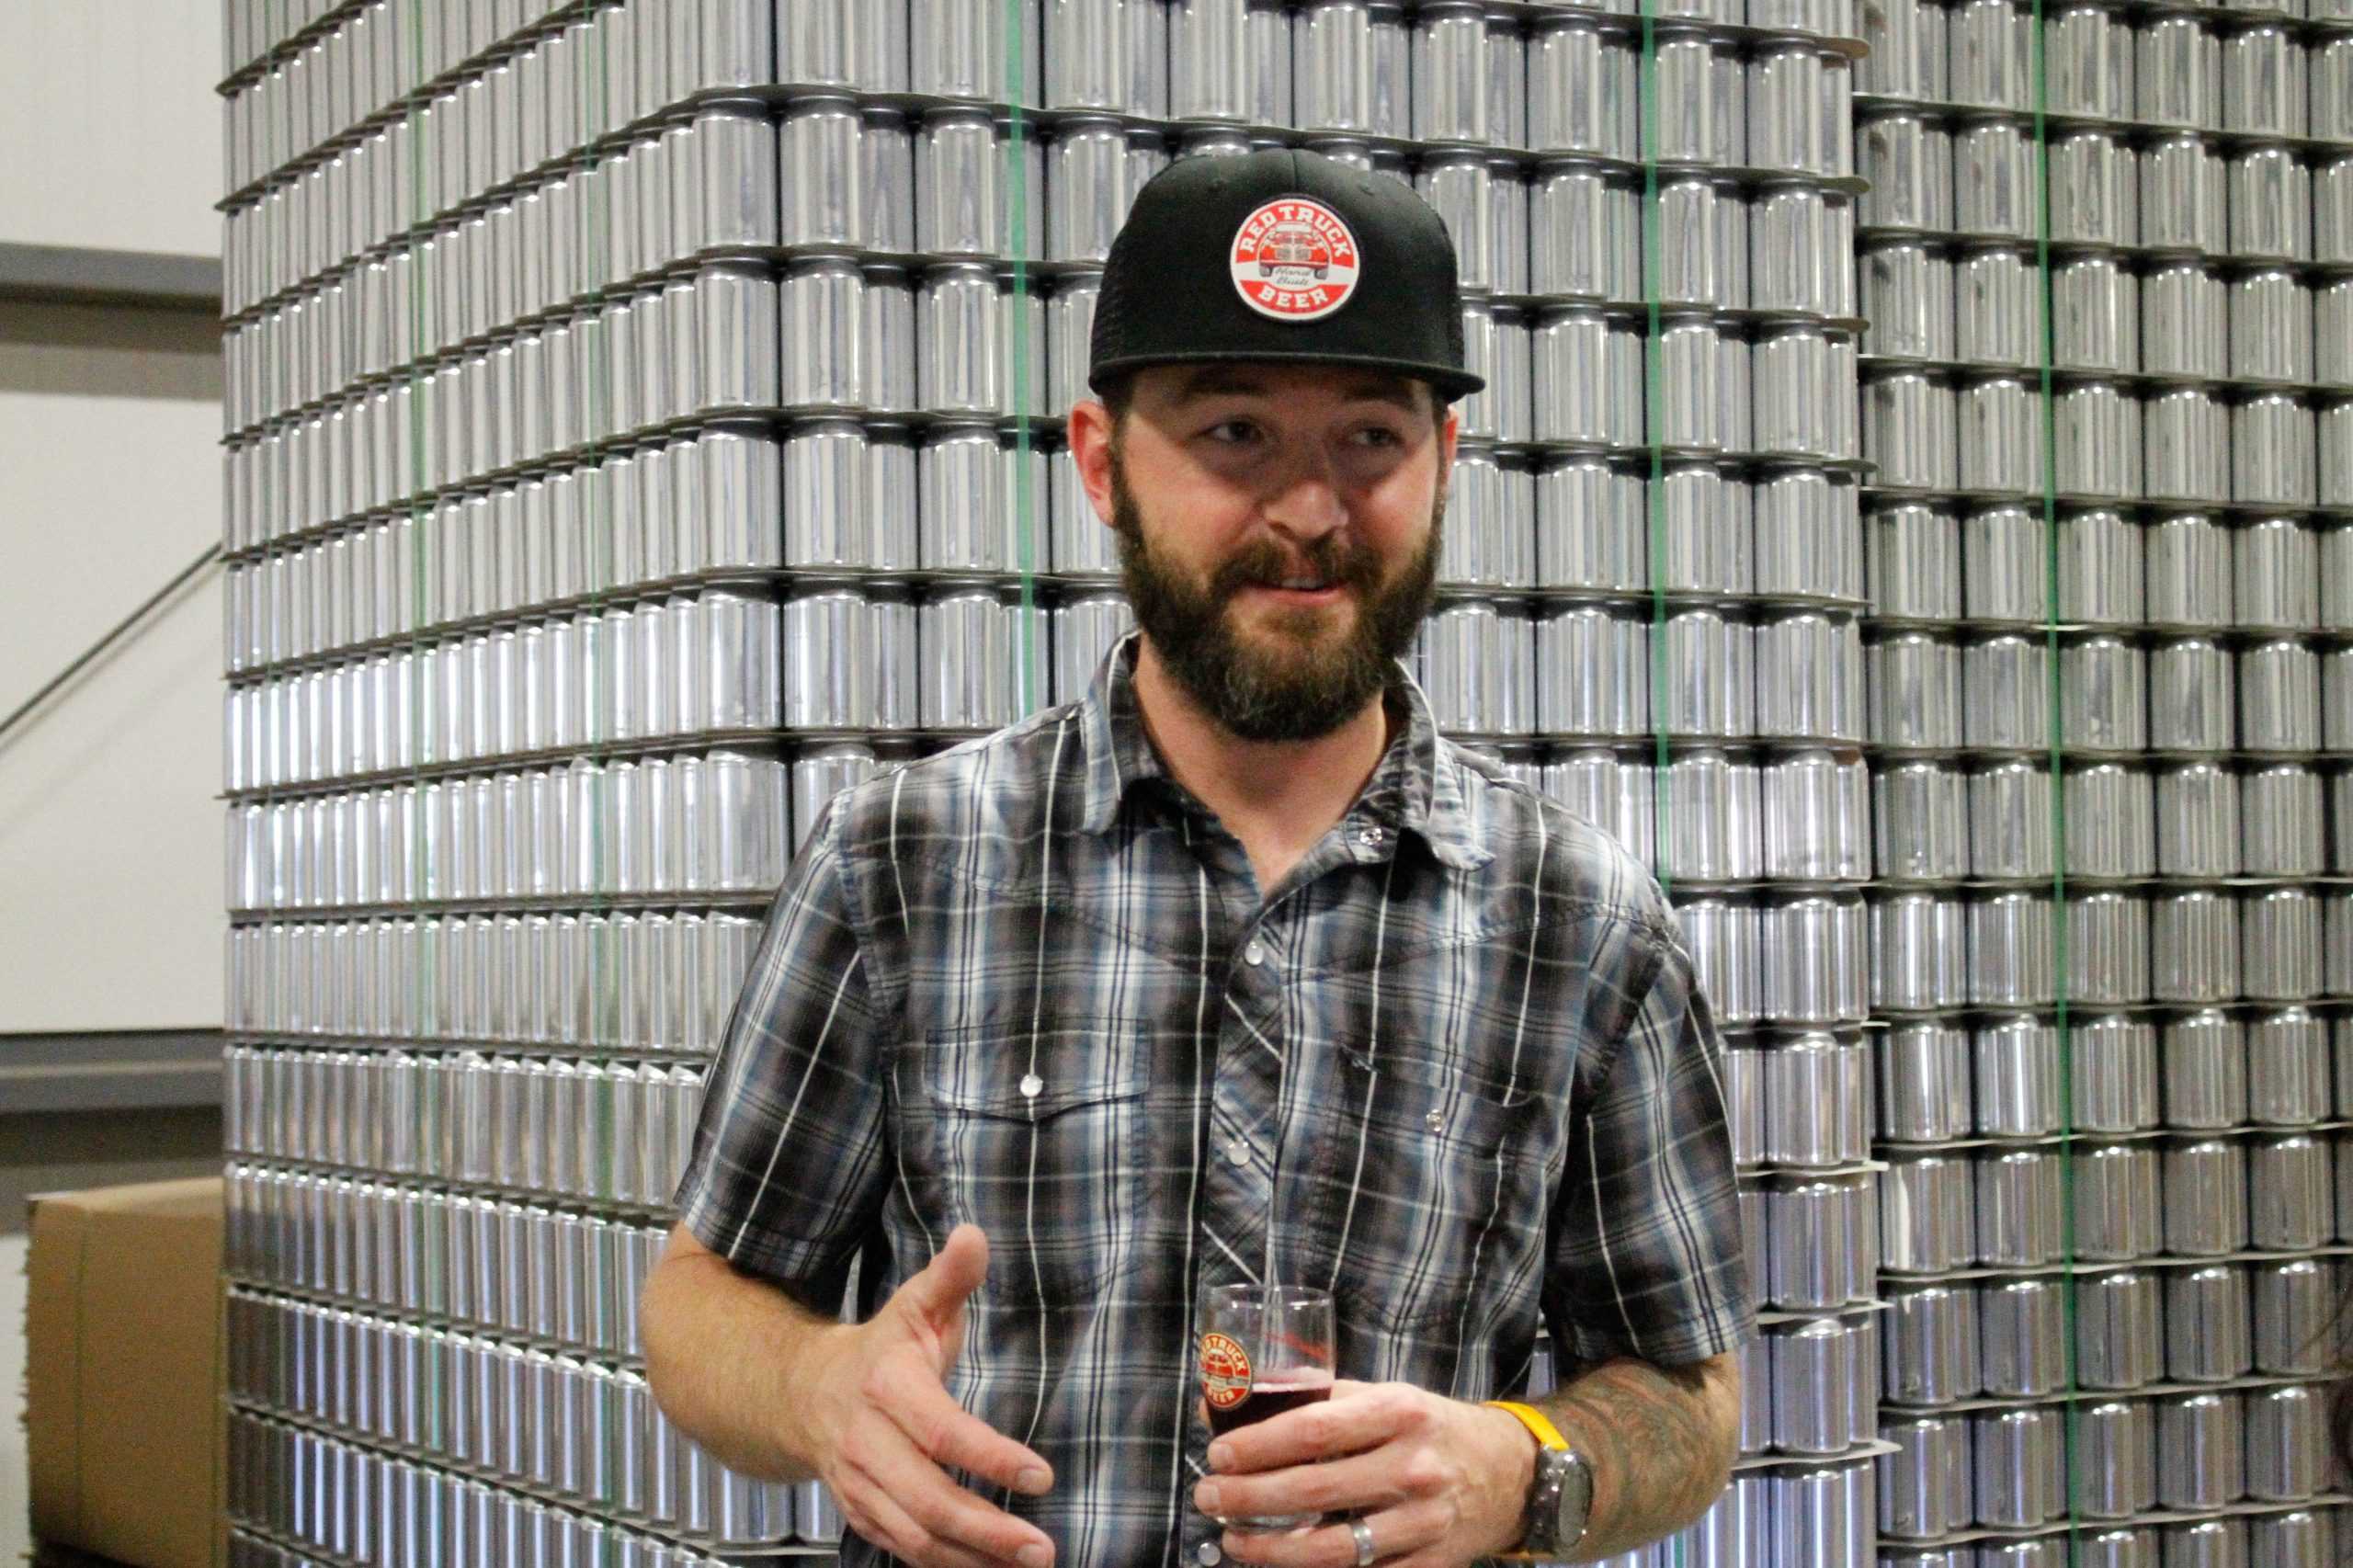 Canada-based+beer+company+offers+unique+brewing+style+to+Fort+Collins